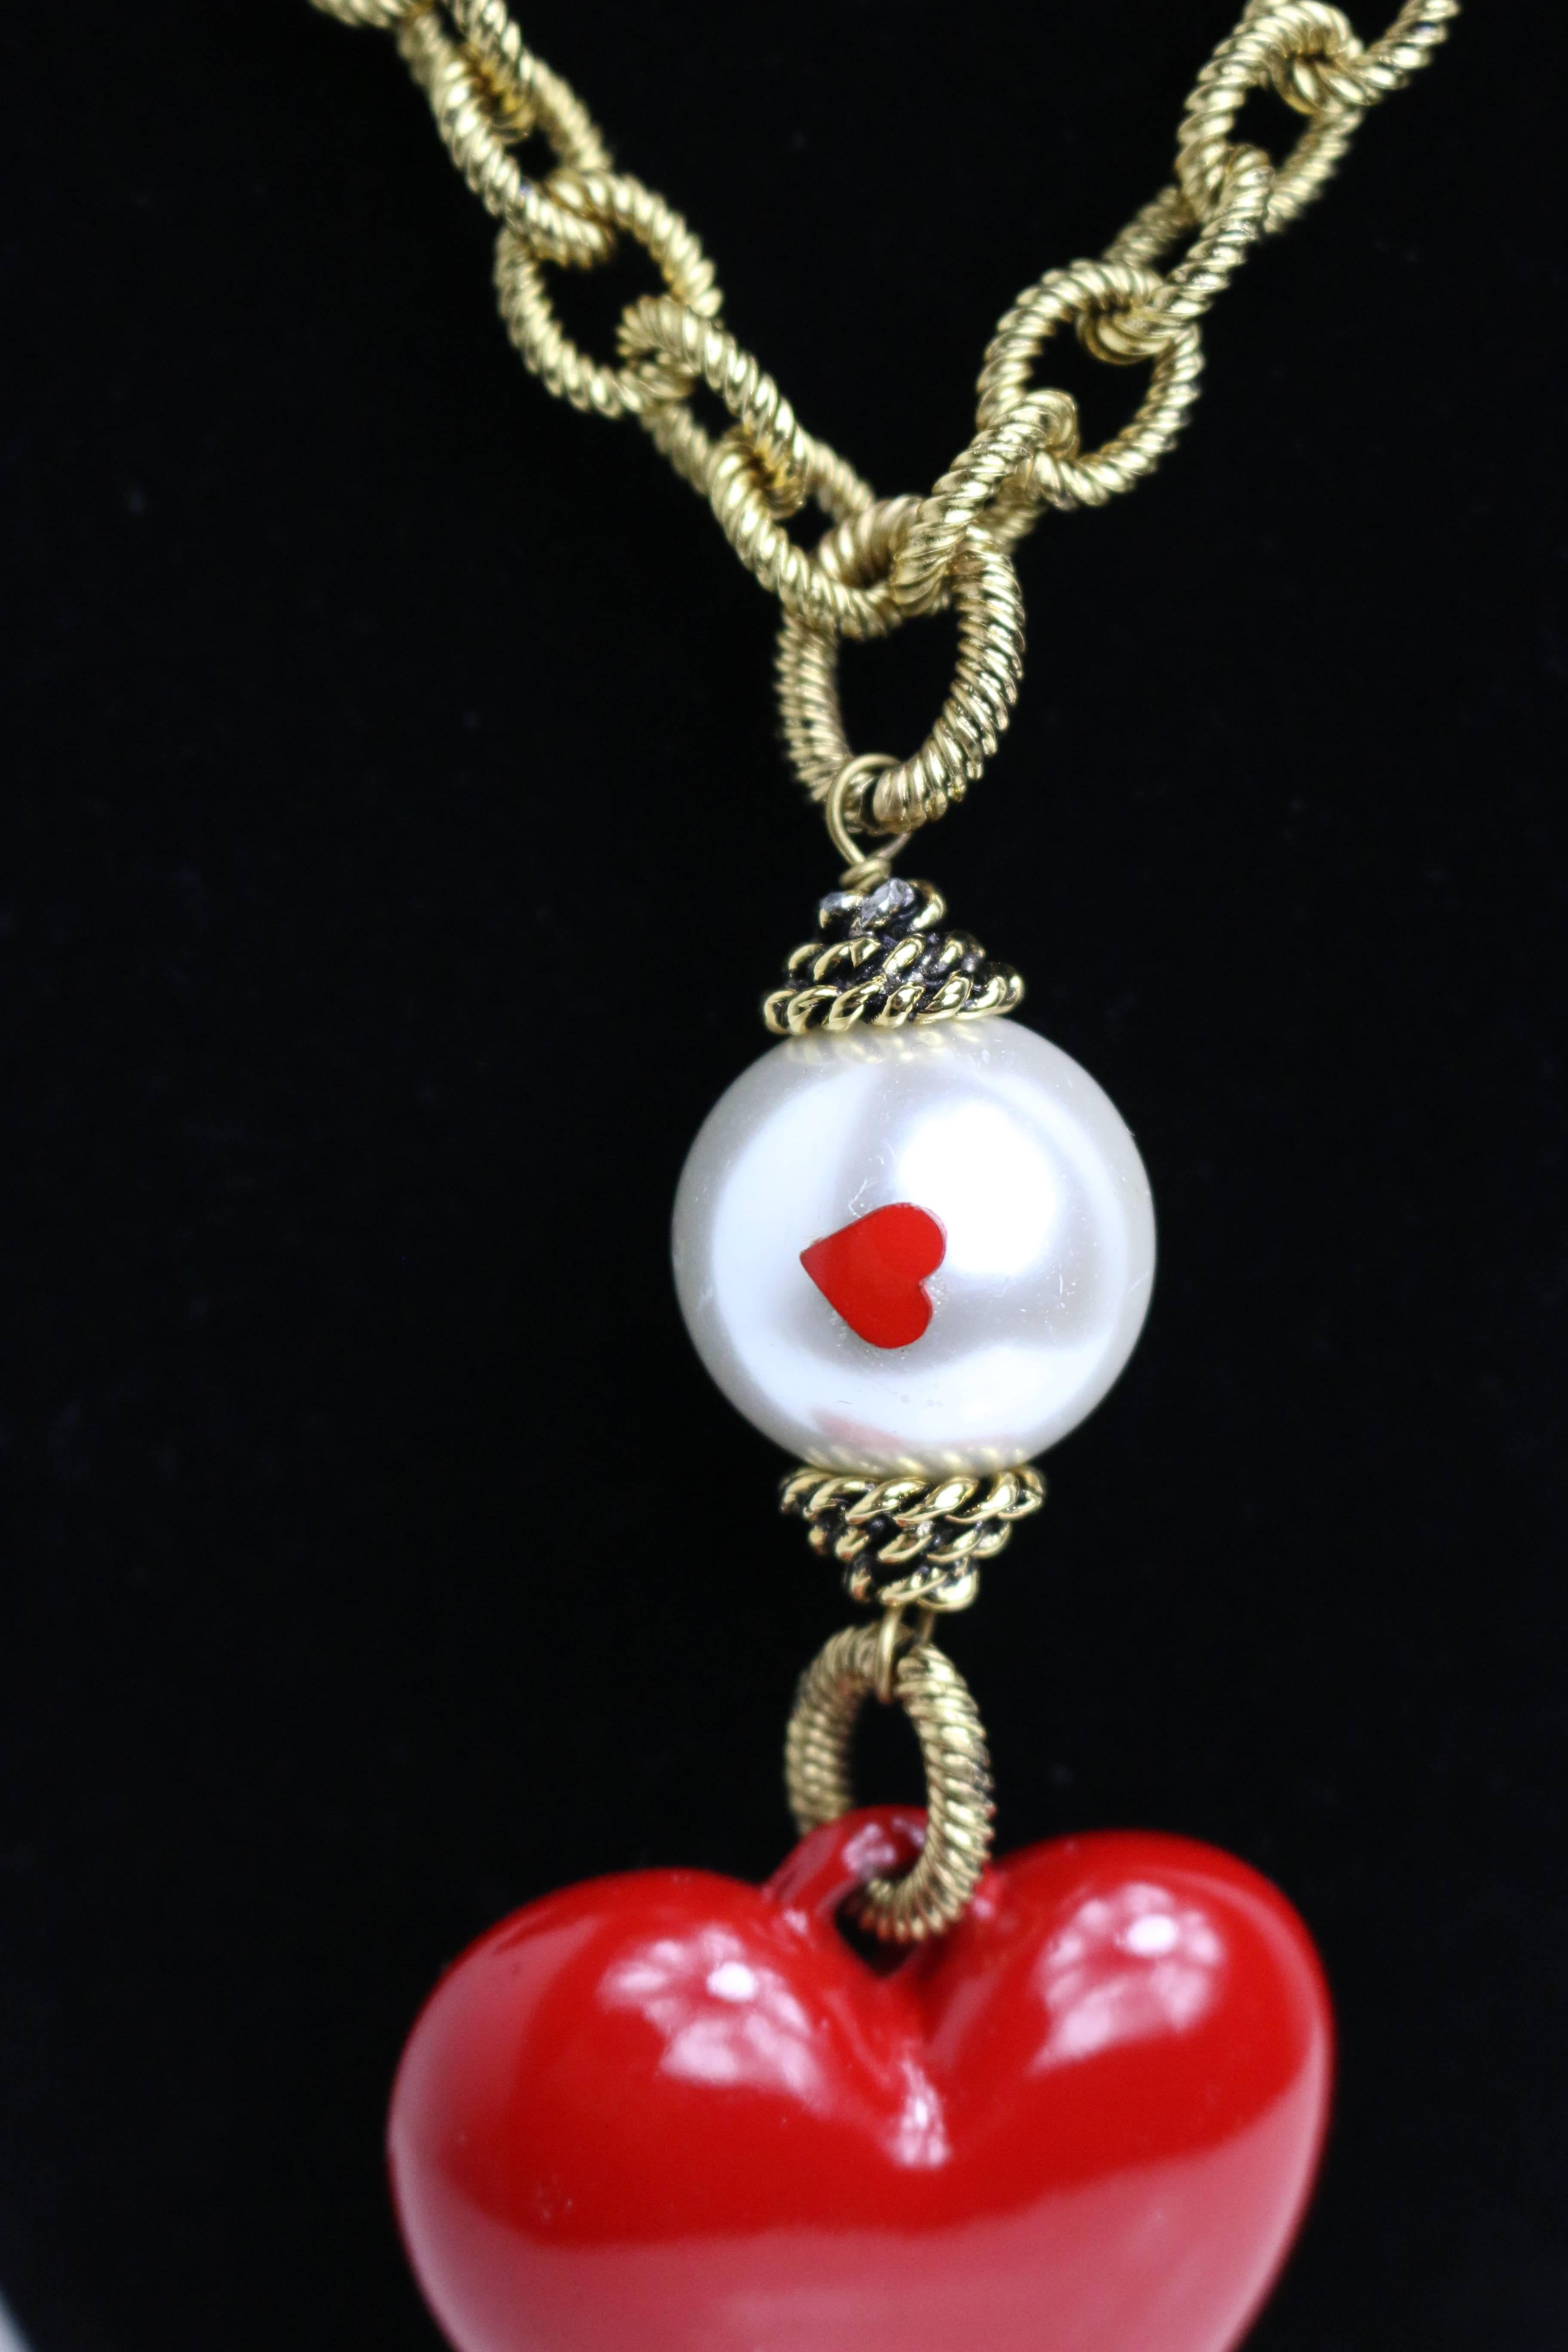 - Vintage 90s rare Moschino faux pearls with heart shape pendant necklace. 

- Featuring gold toned hardware cable chain with five faux pearls and two hearts on each, a plastic heart shape pendant and clasp fastening. 

- Made in Italy. 

- The